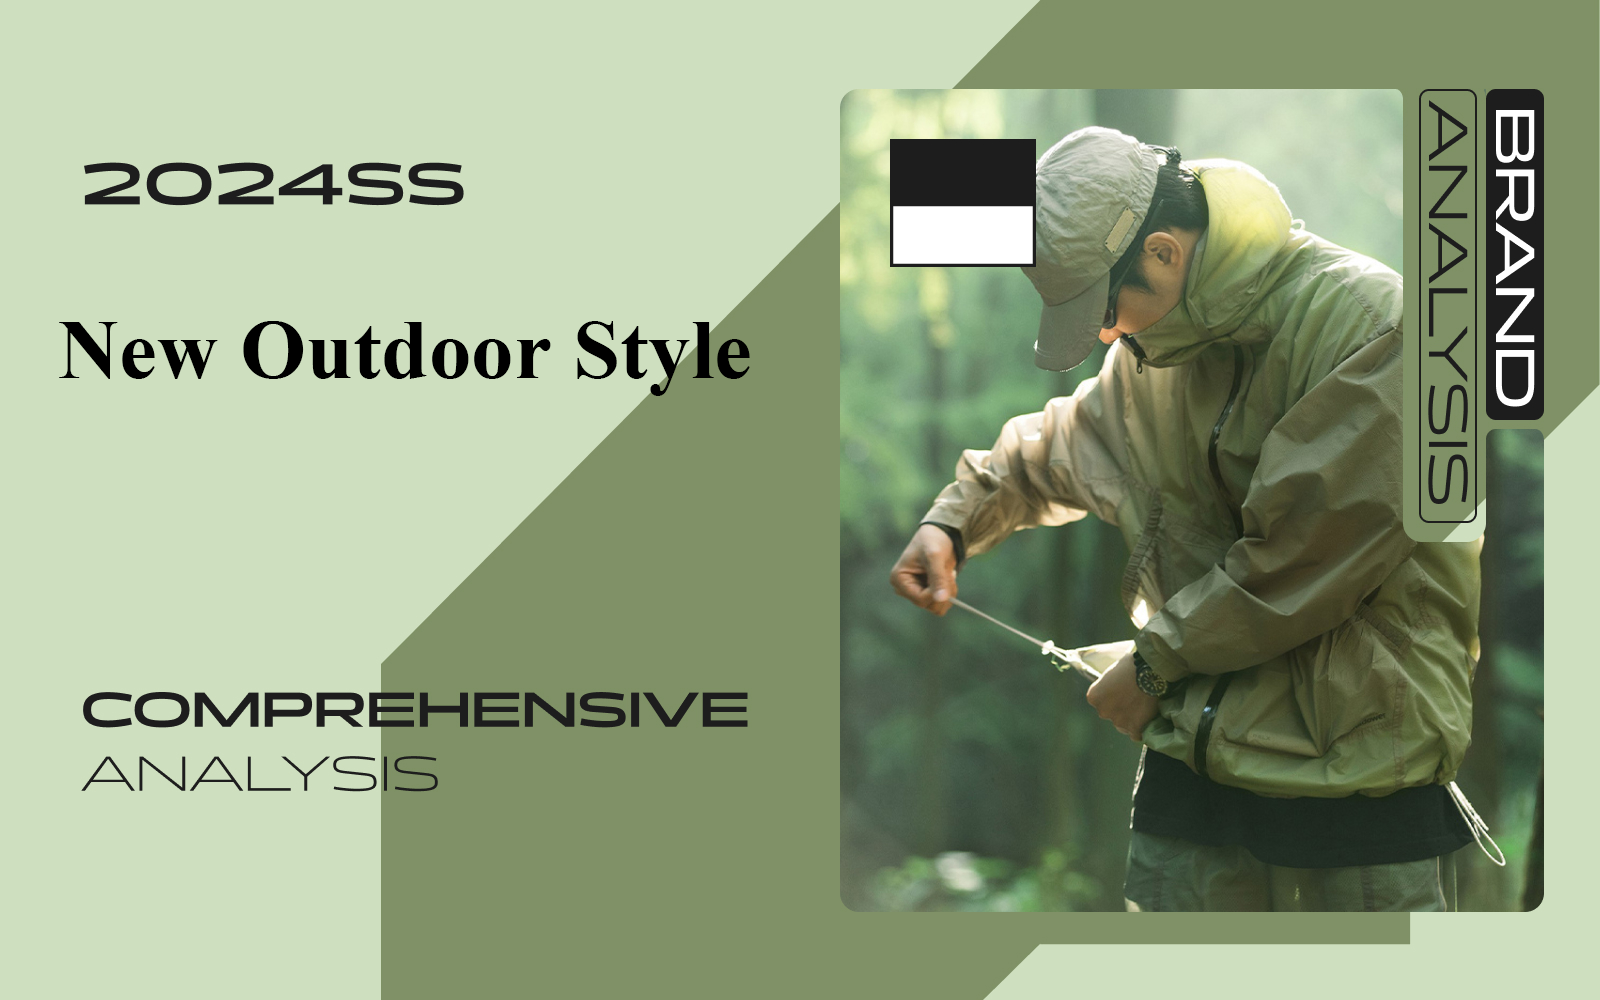 New Outdoor Style -- The Comprehensive Analysis of Menswear Designer Brand